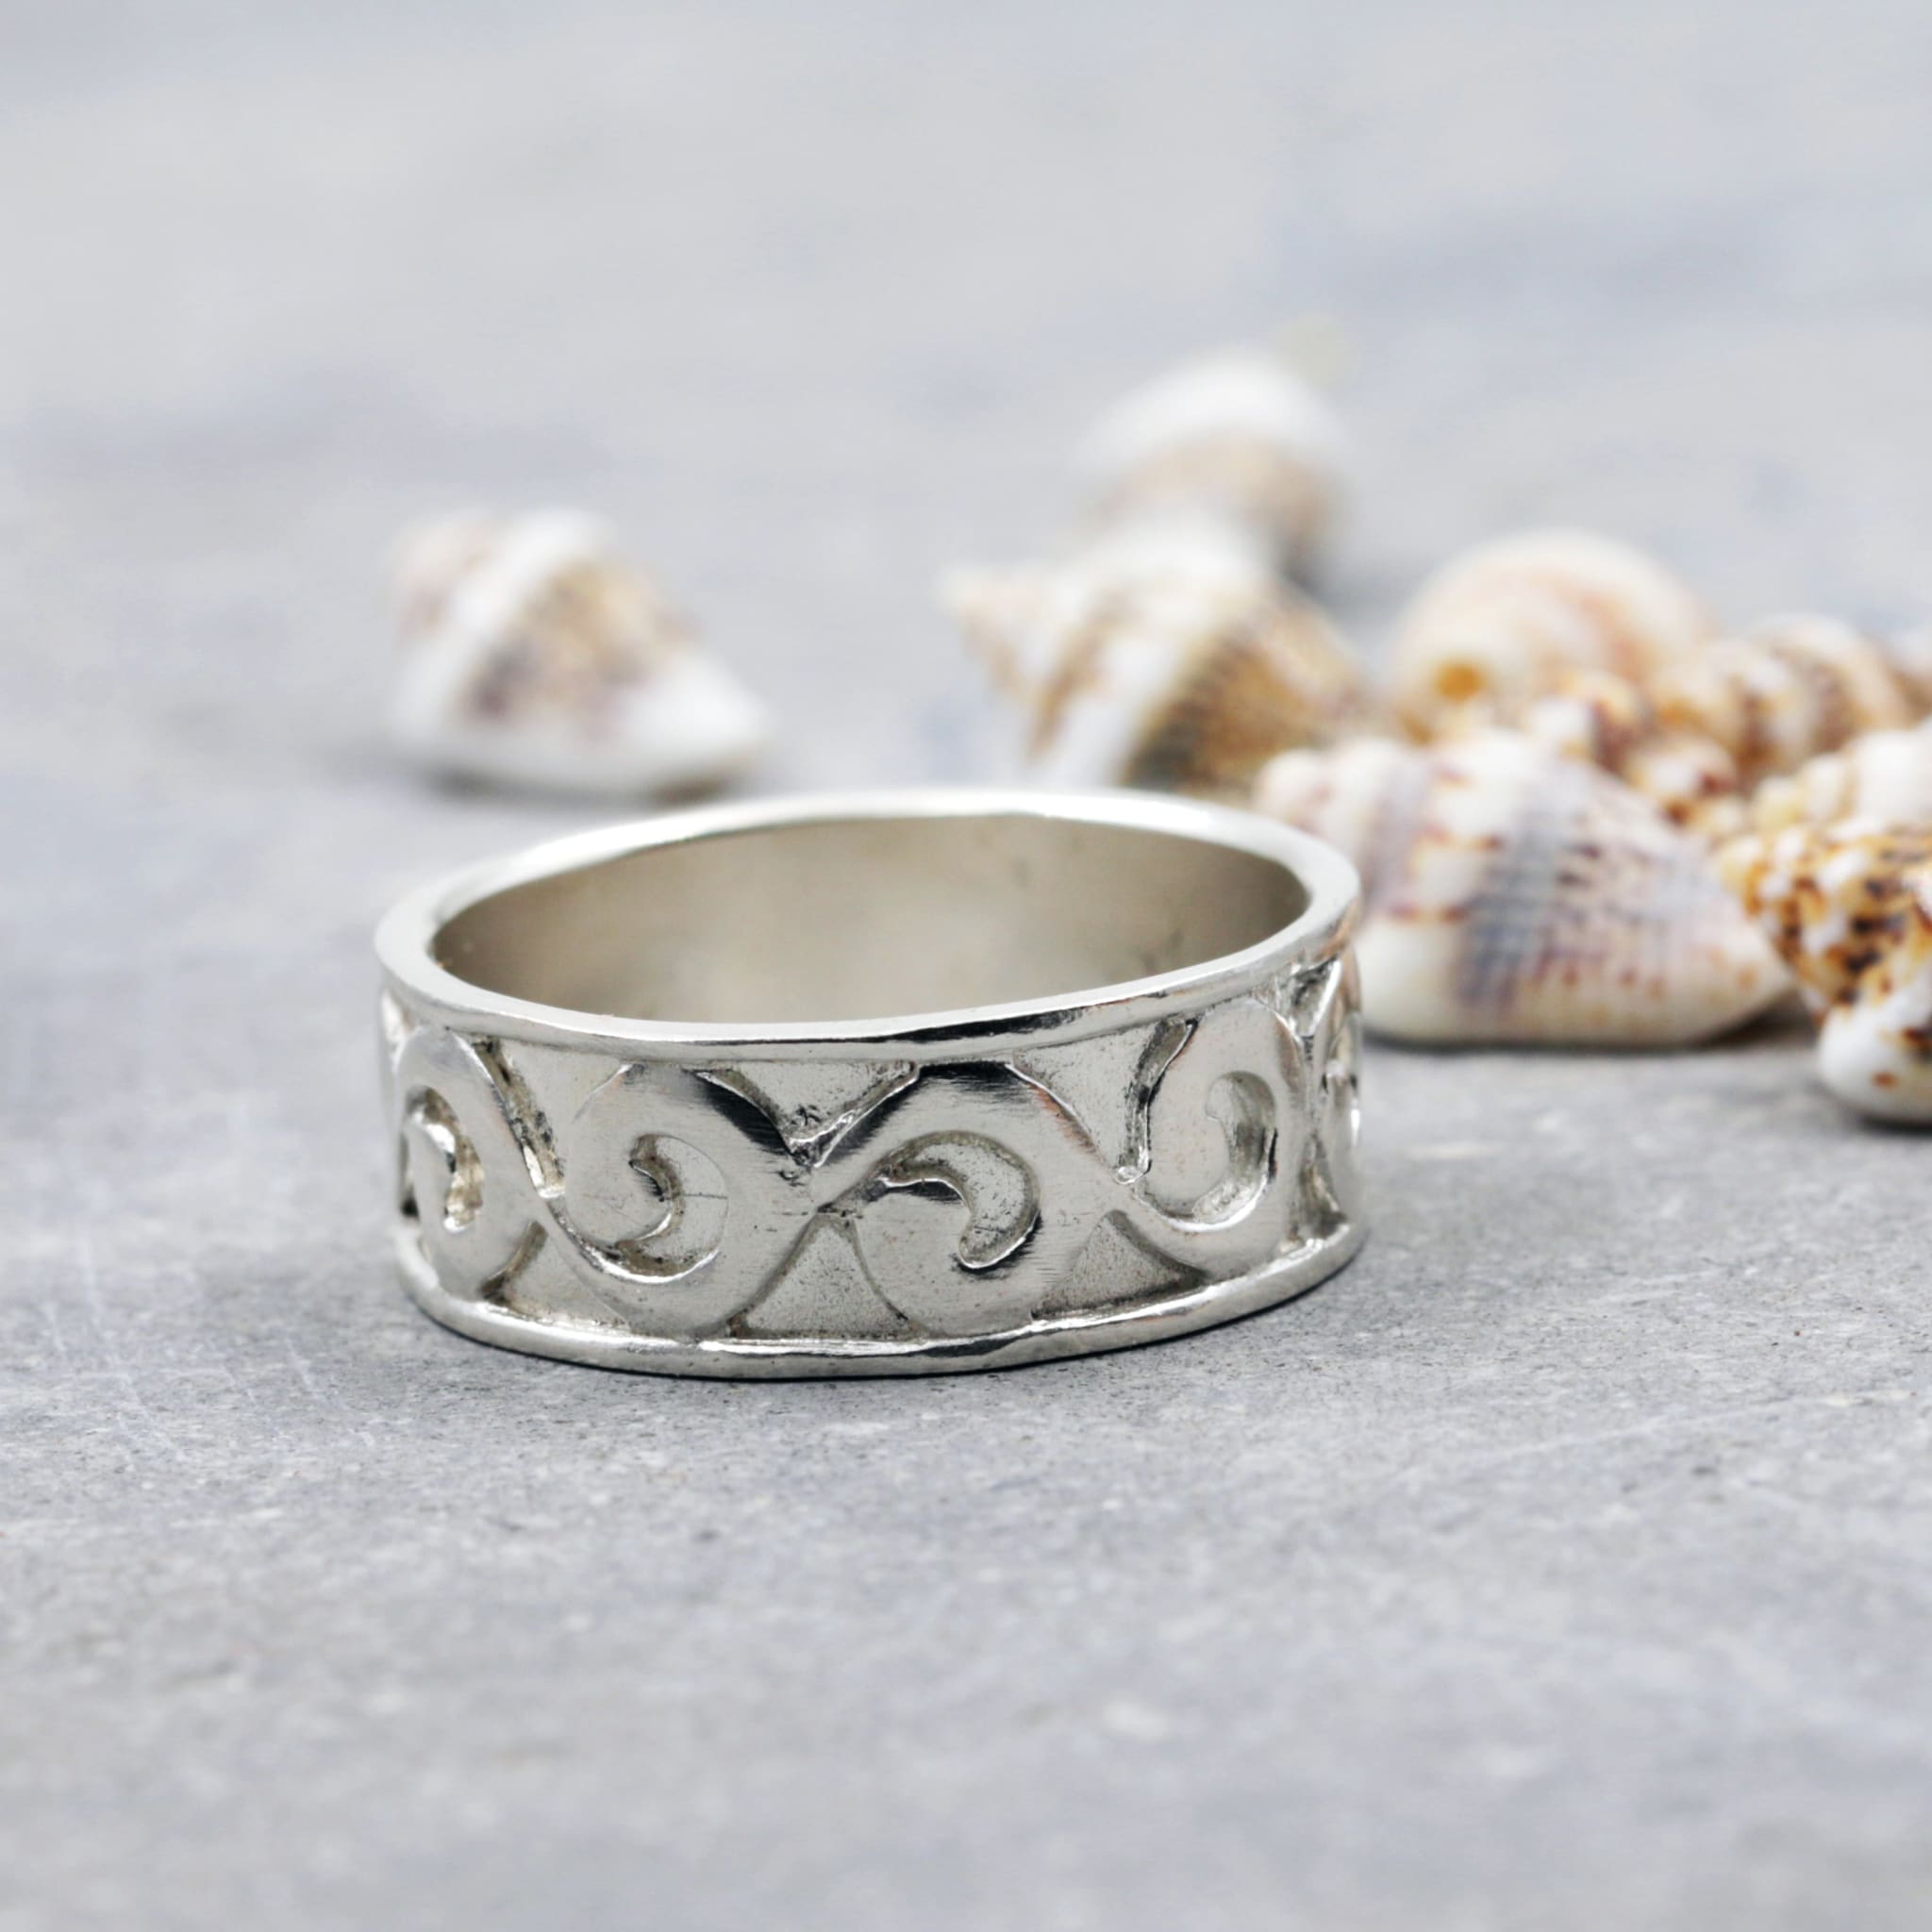 Silver Band Spoon Ring Size 12 1/2 - Etsy | Silver band, Ring size, Silver